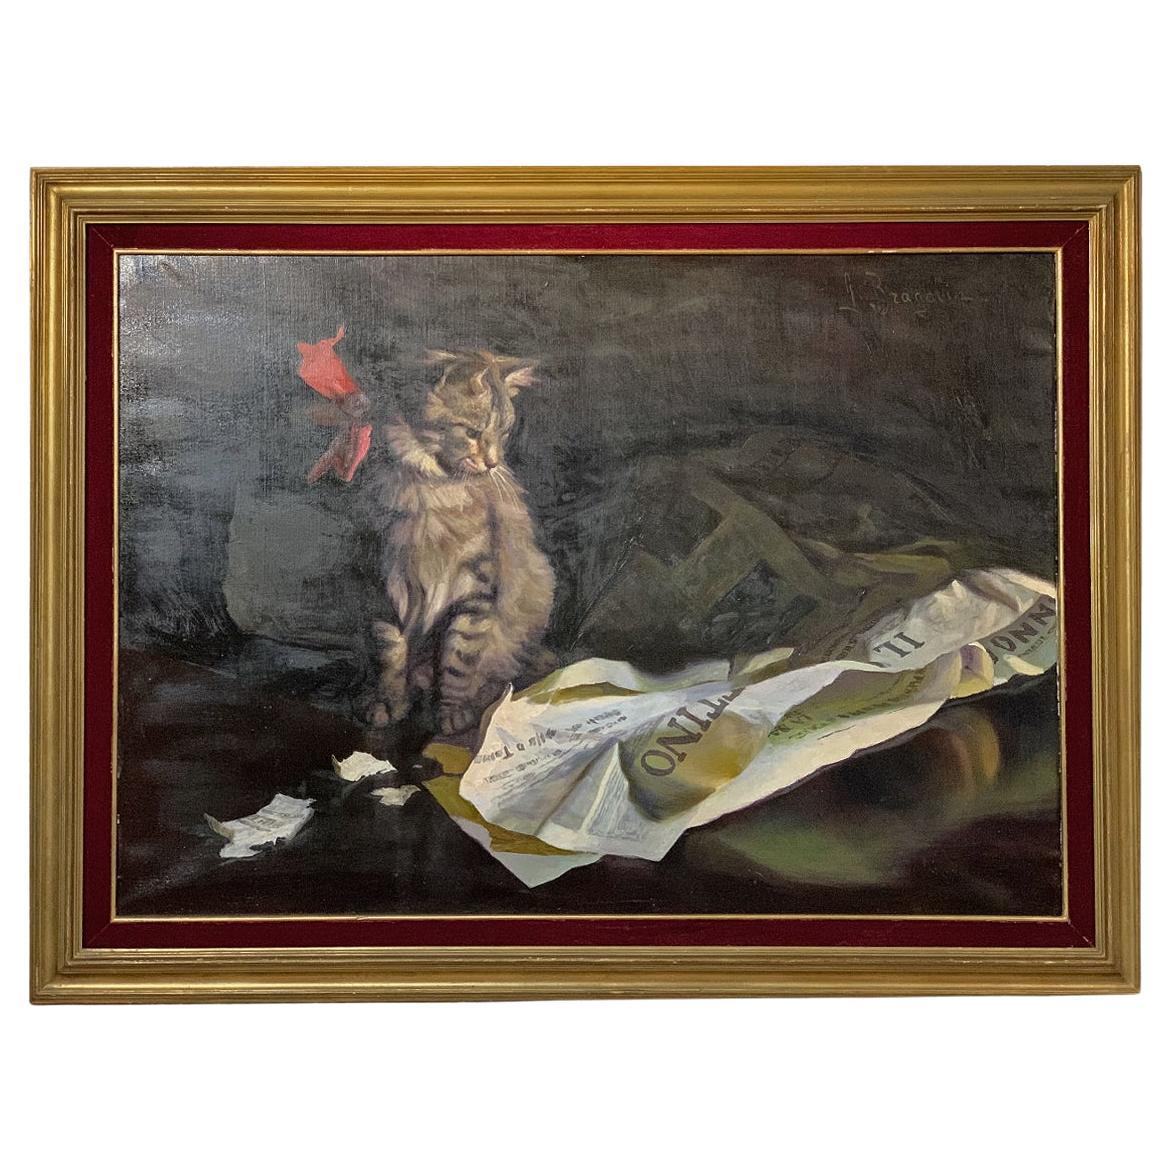 19th CENTURY PAINTING WITH CAT GAME AND VENETO "GAZZETTINO" For Sale